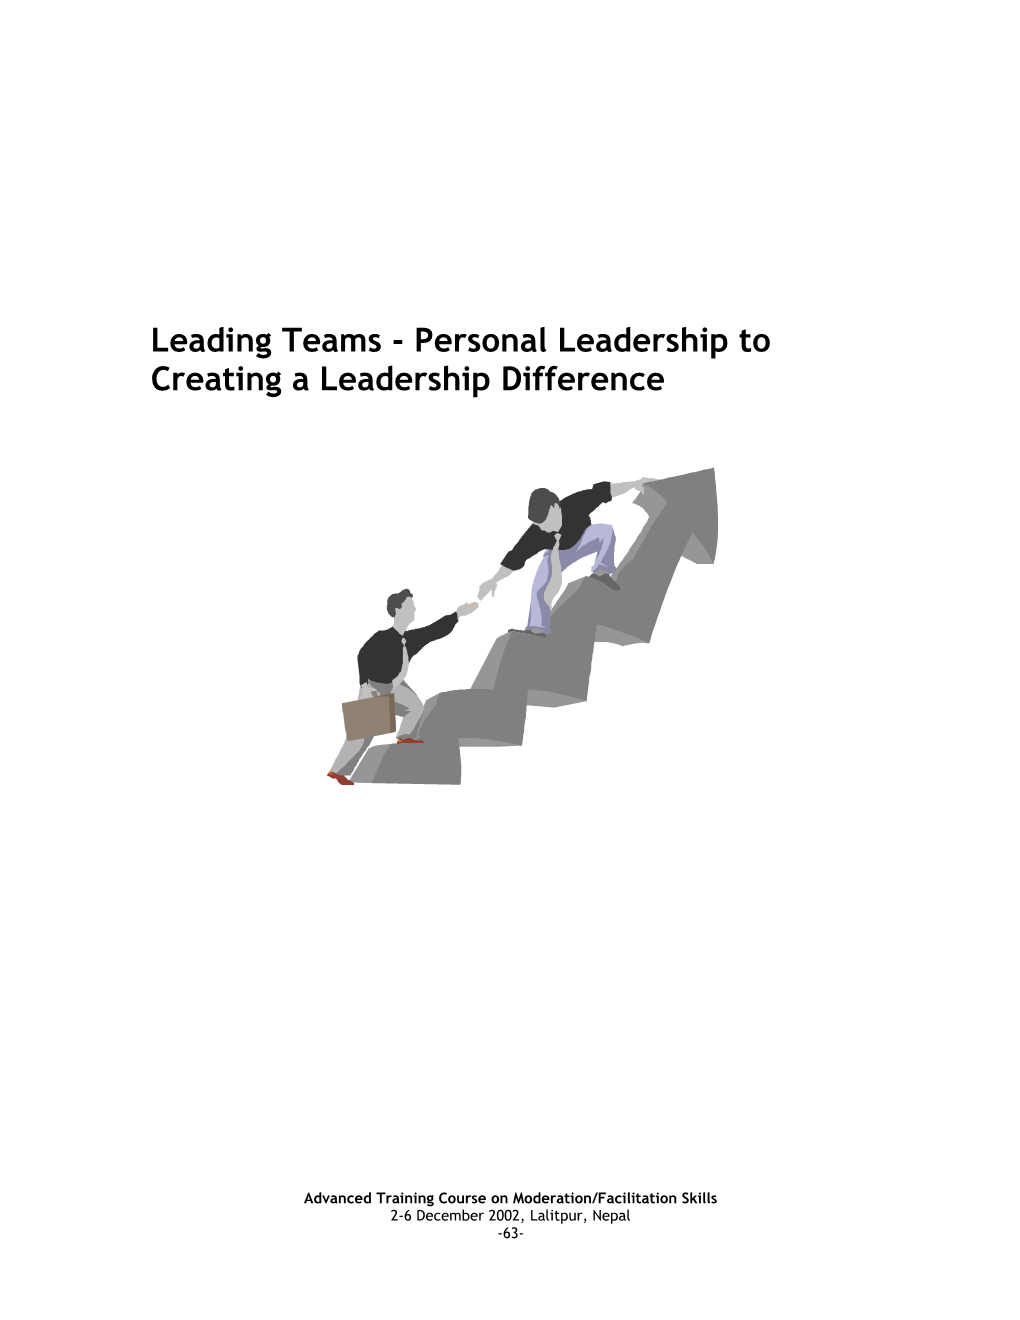 Leading Teams - Personal Leadership to Creating a Leadership Difference